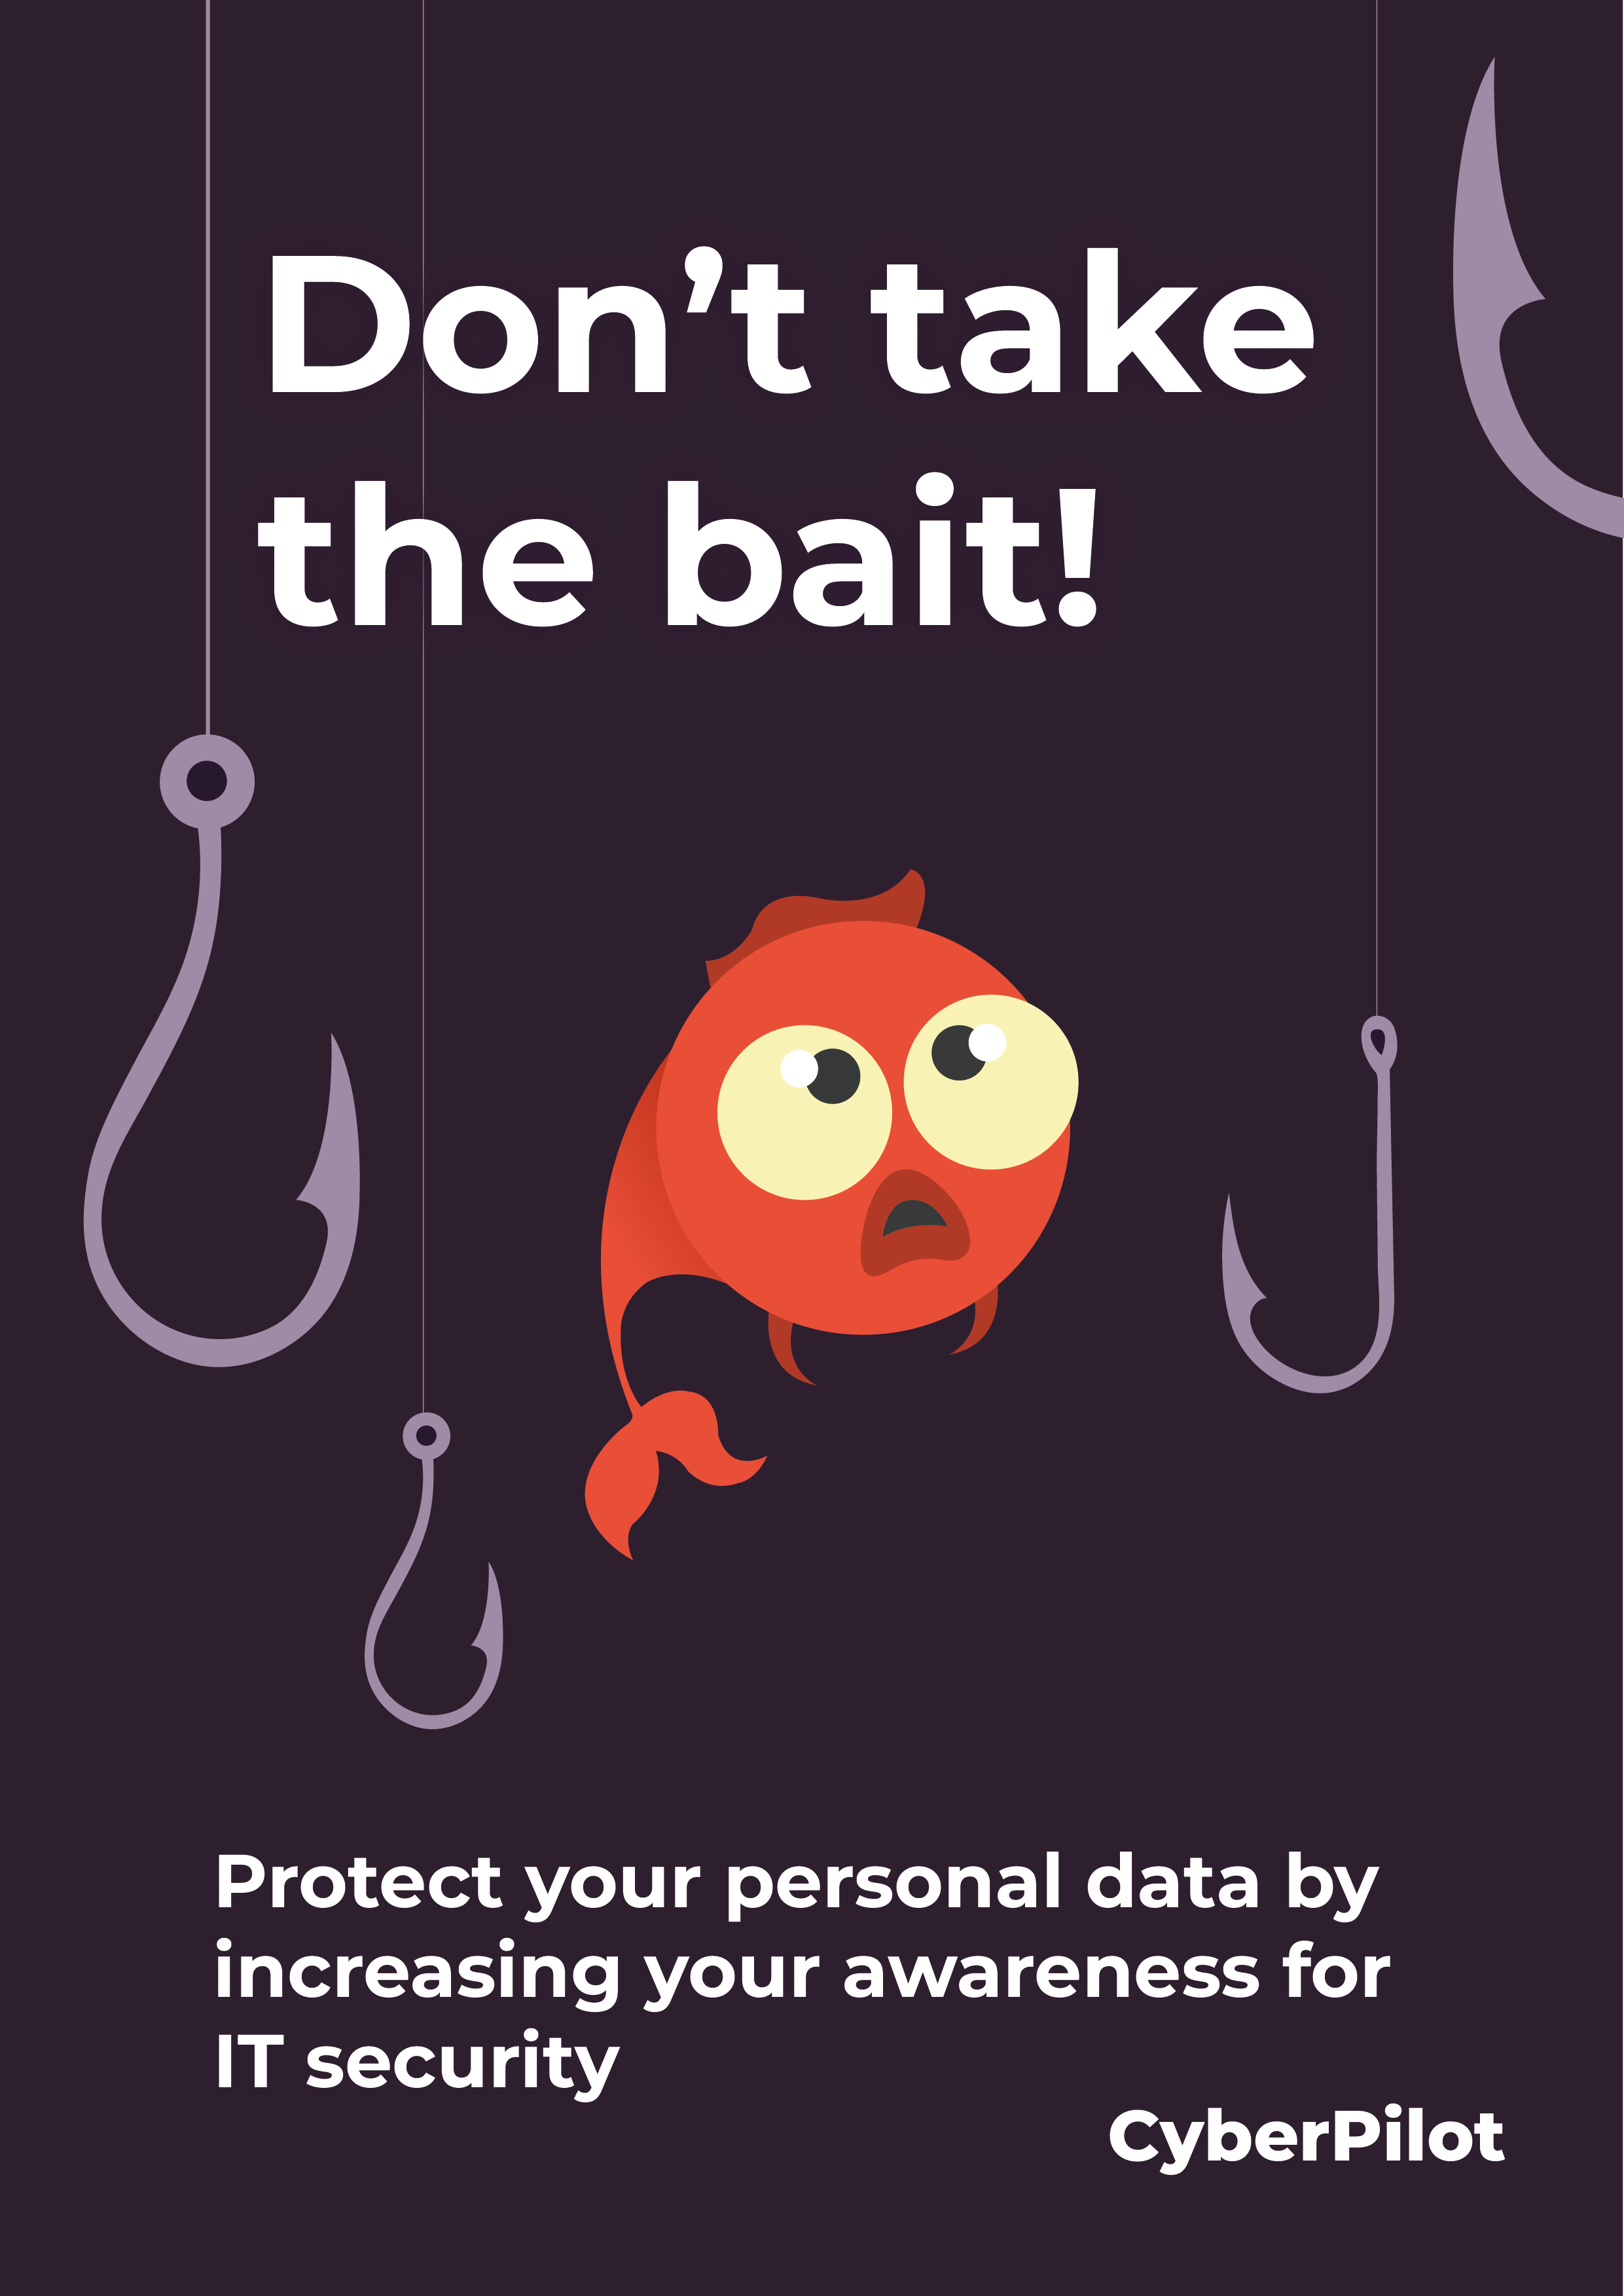 Free Posters About Cyber Security and GDPR | FintechZoom